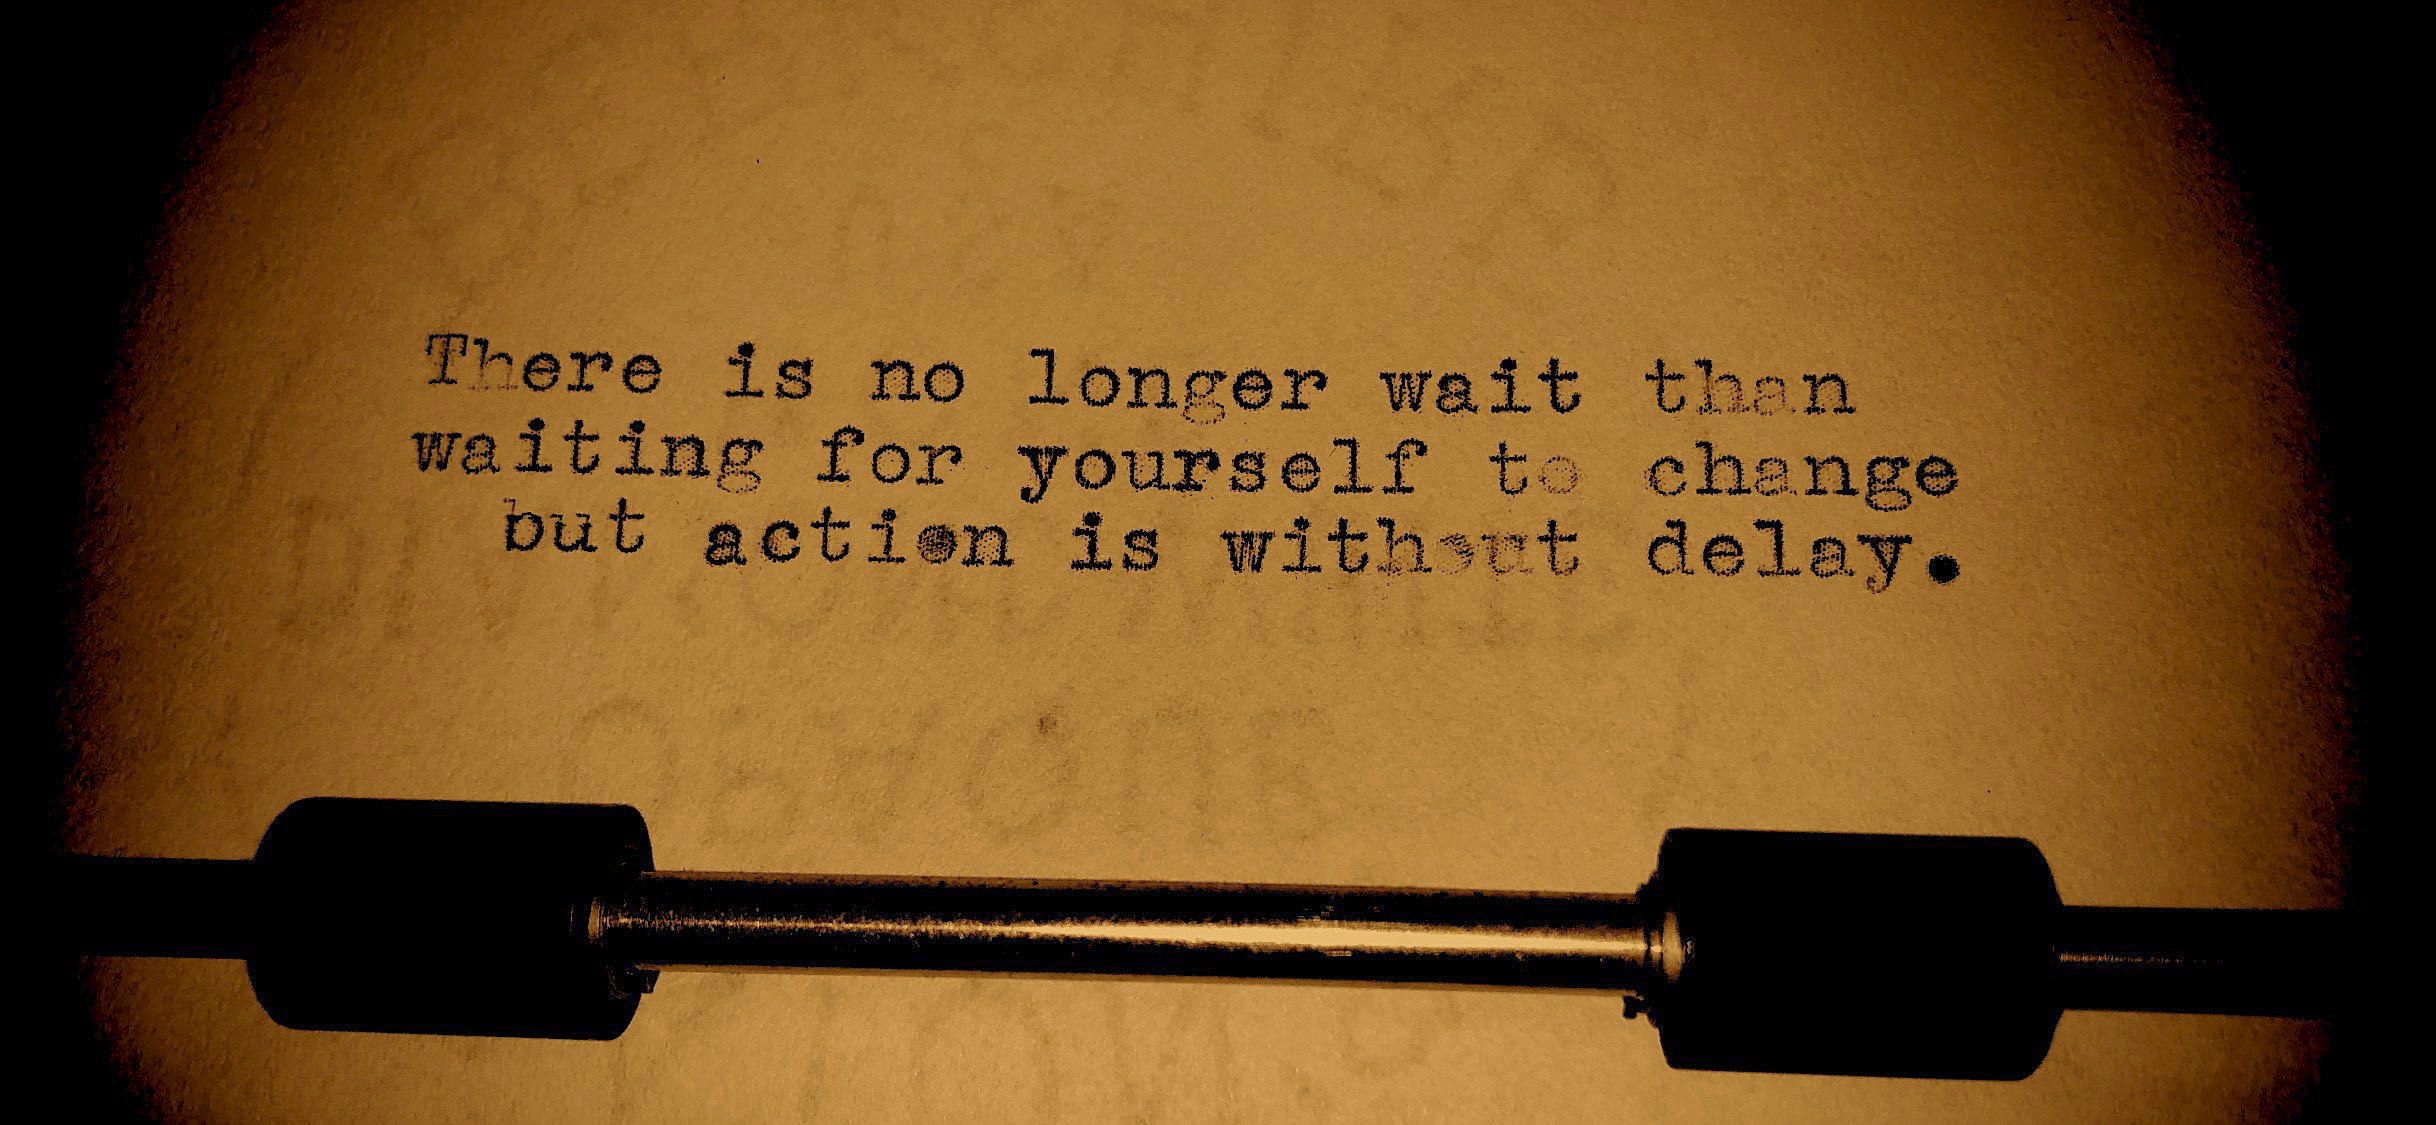 There is no longer wait than waiting for yourself to change but action is without delay.